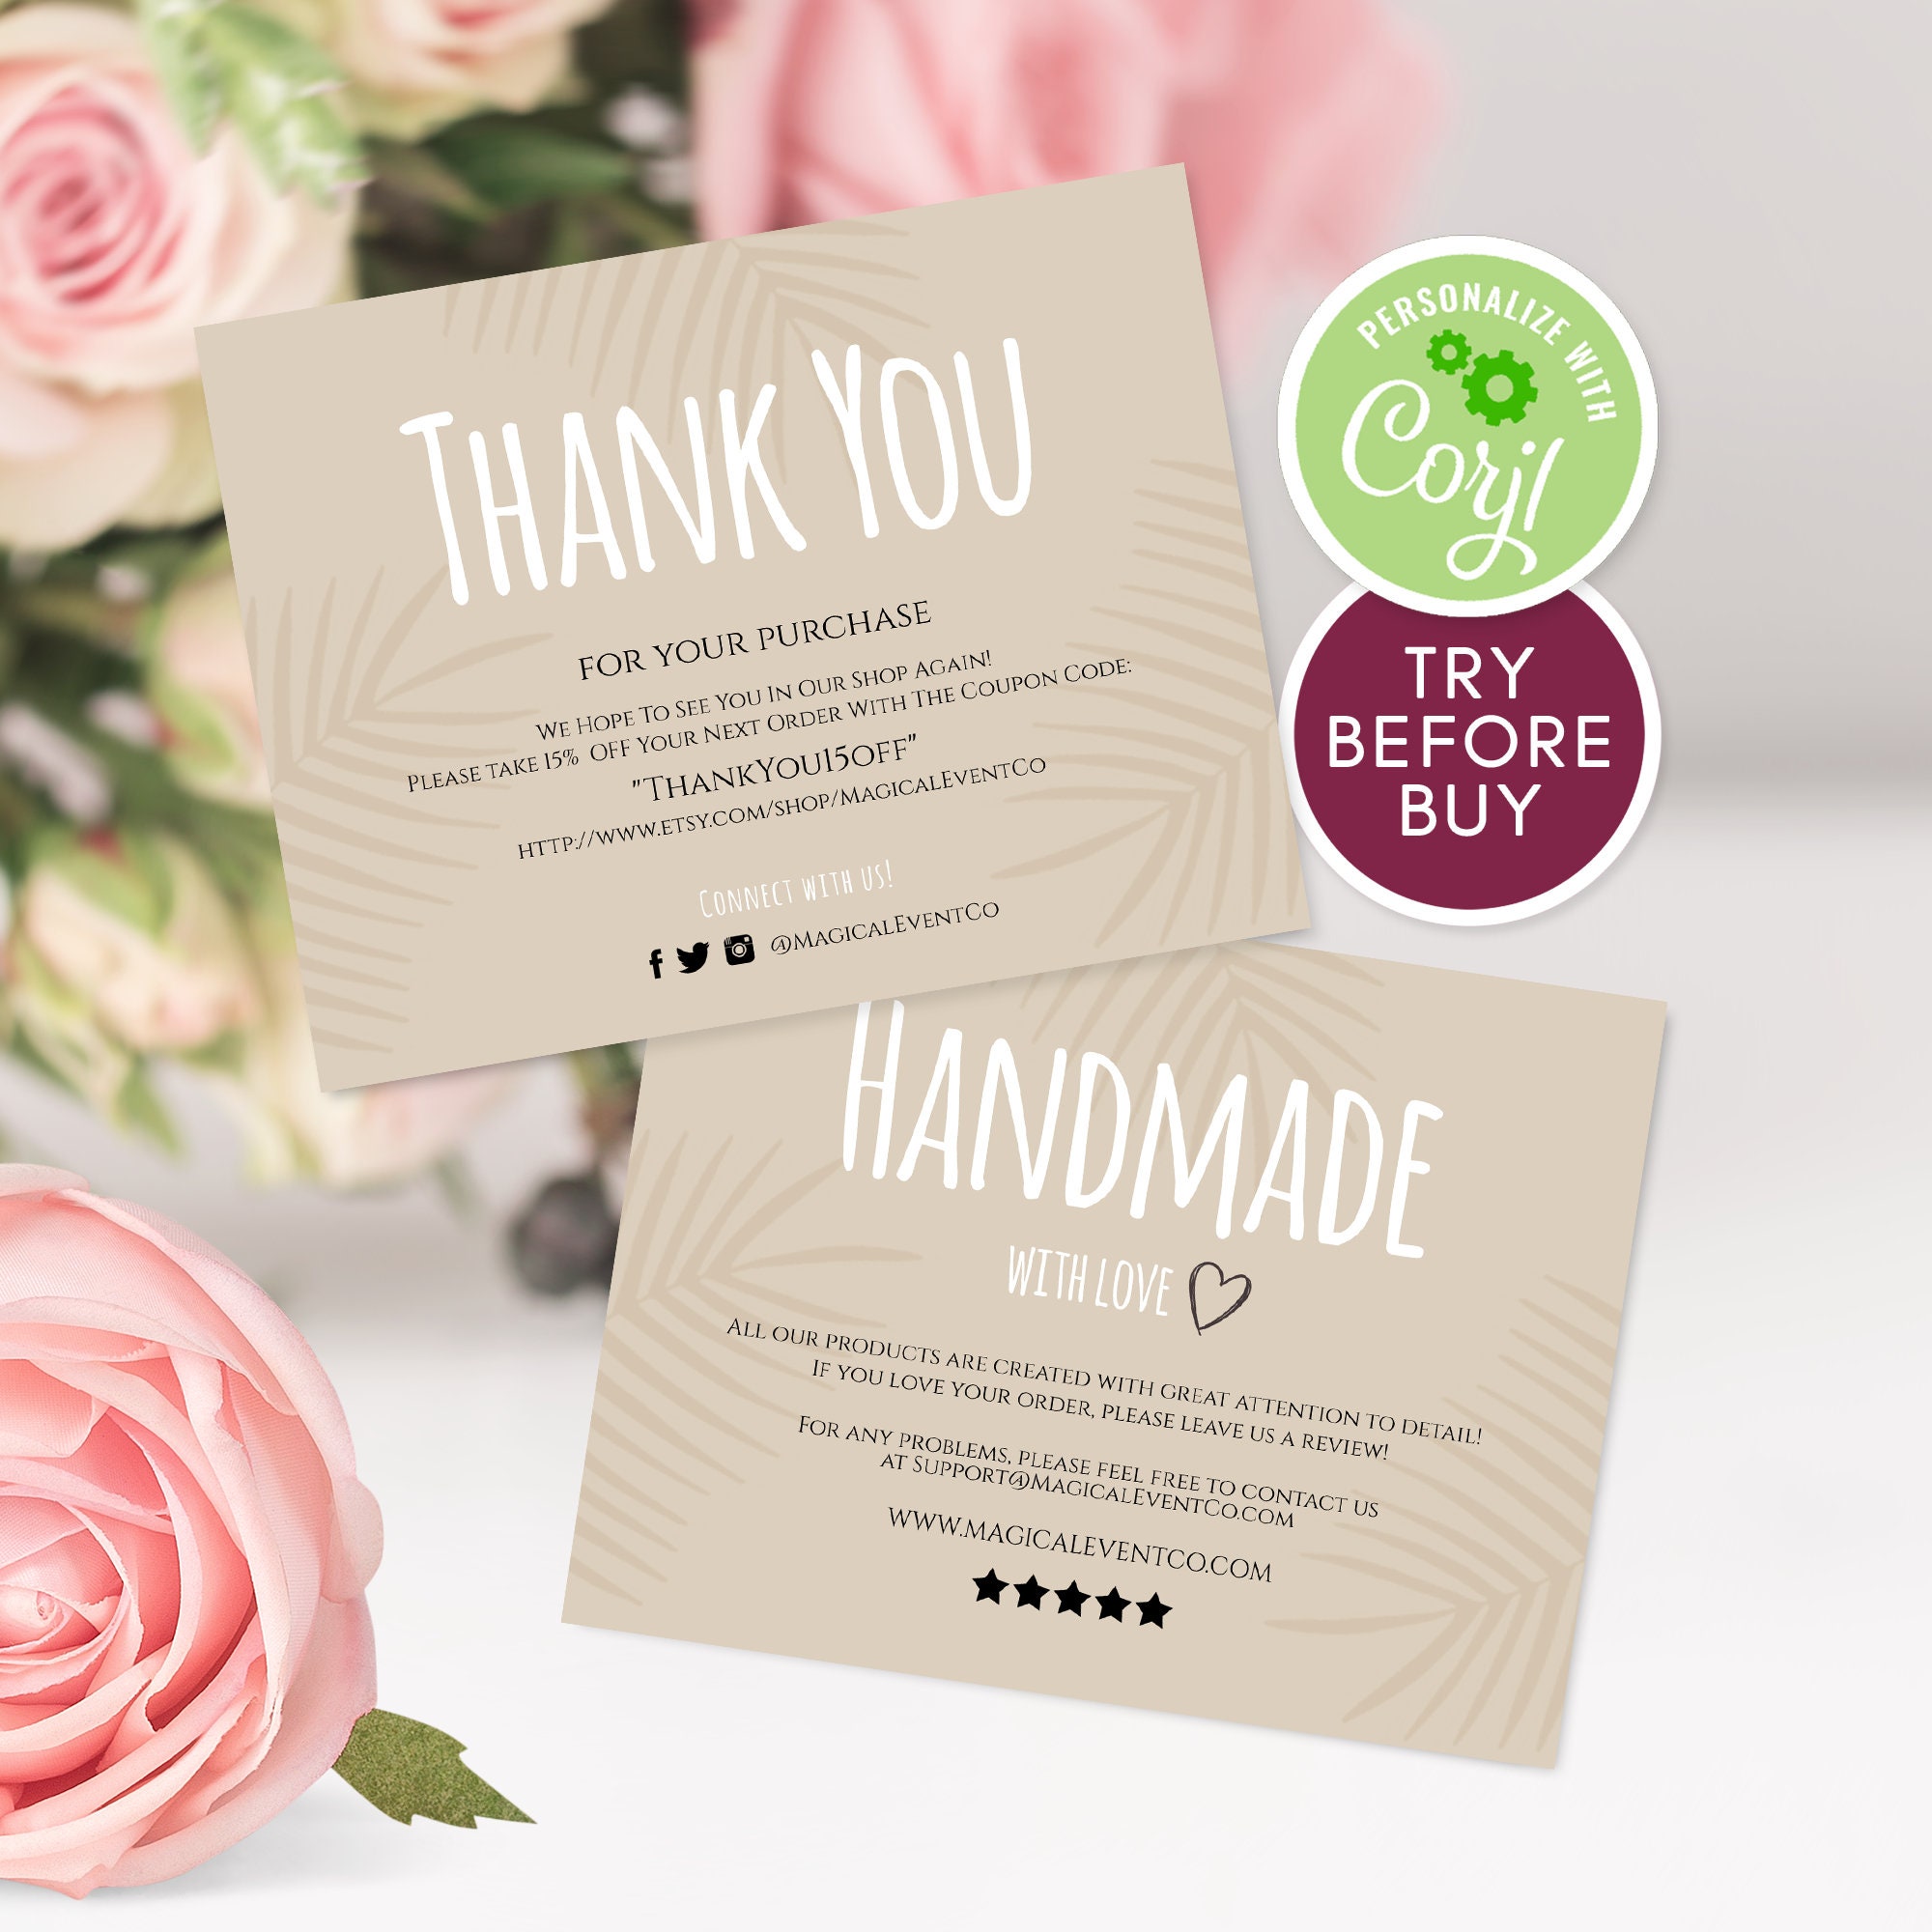 Thank You For Your Purchase Cards Template Small Business | Etsy